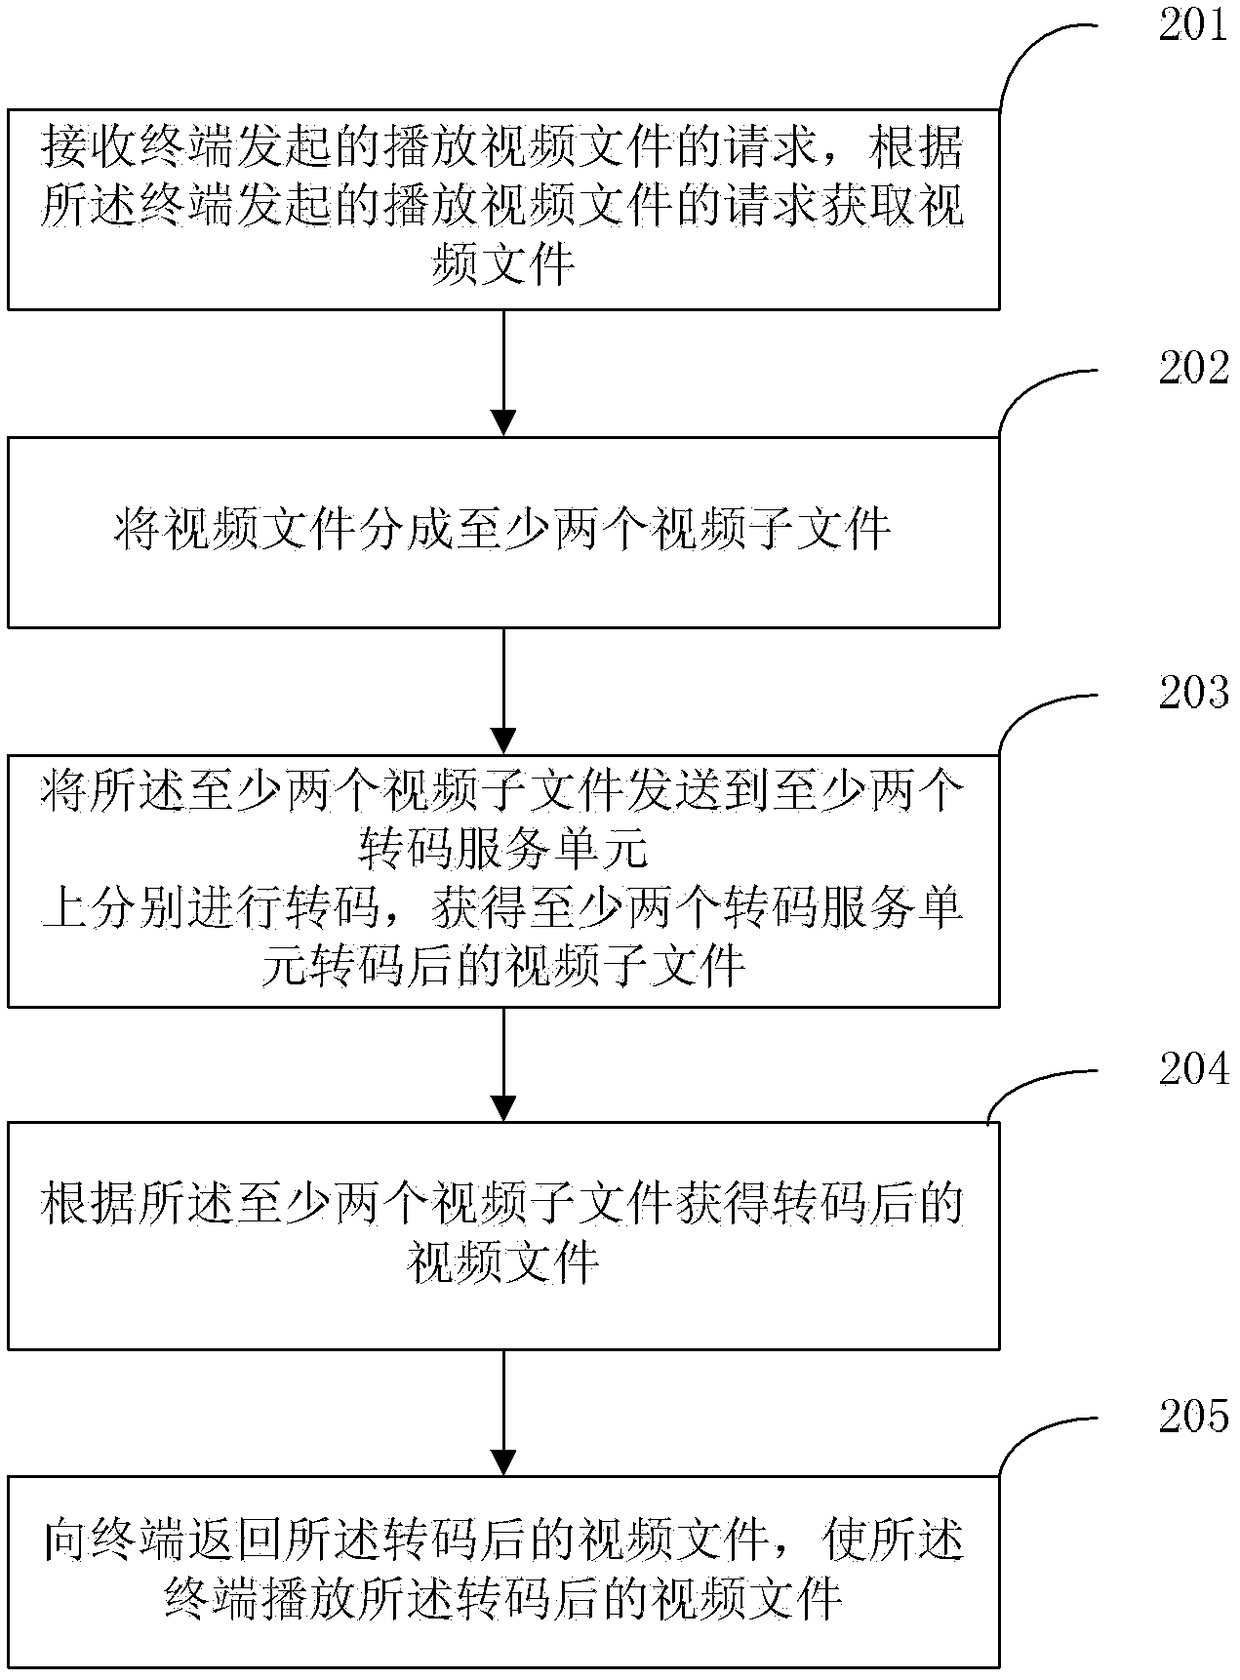 Video file processing method, device, video server and system